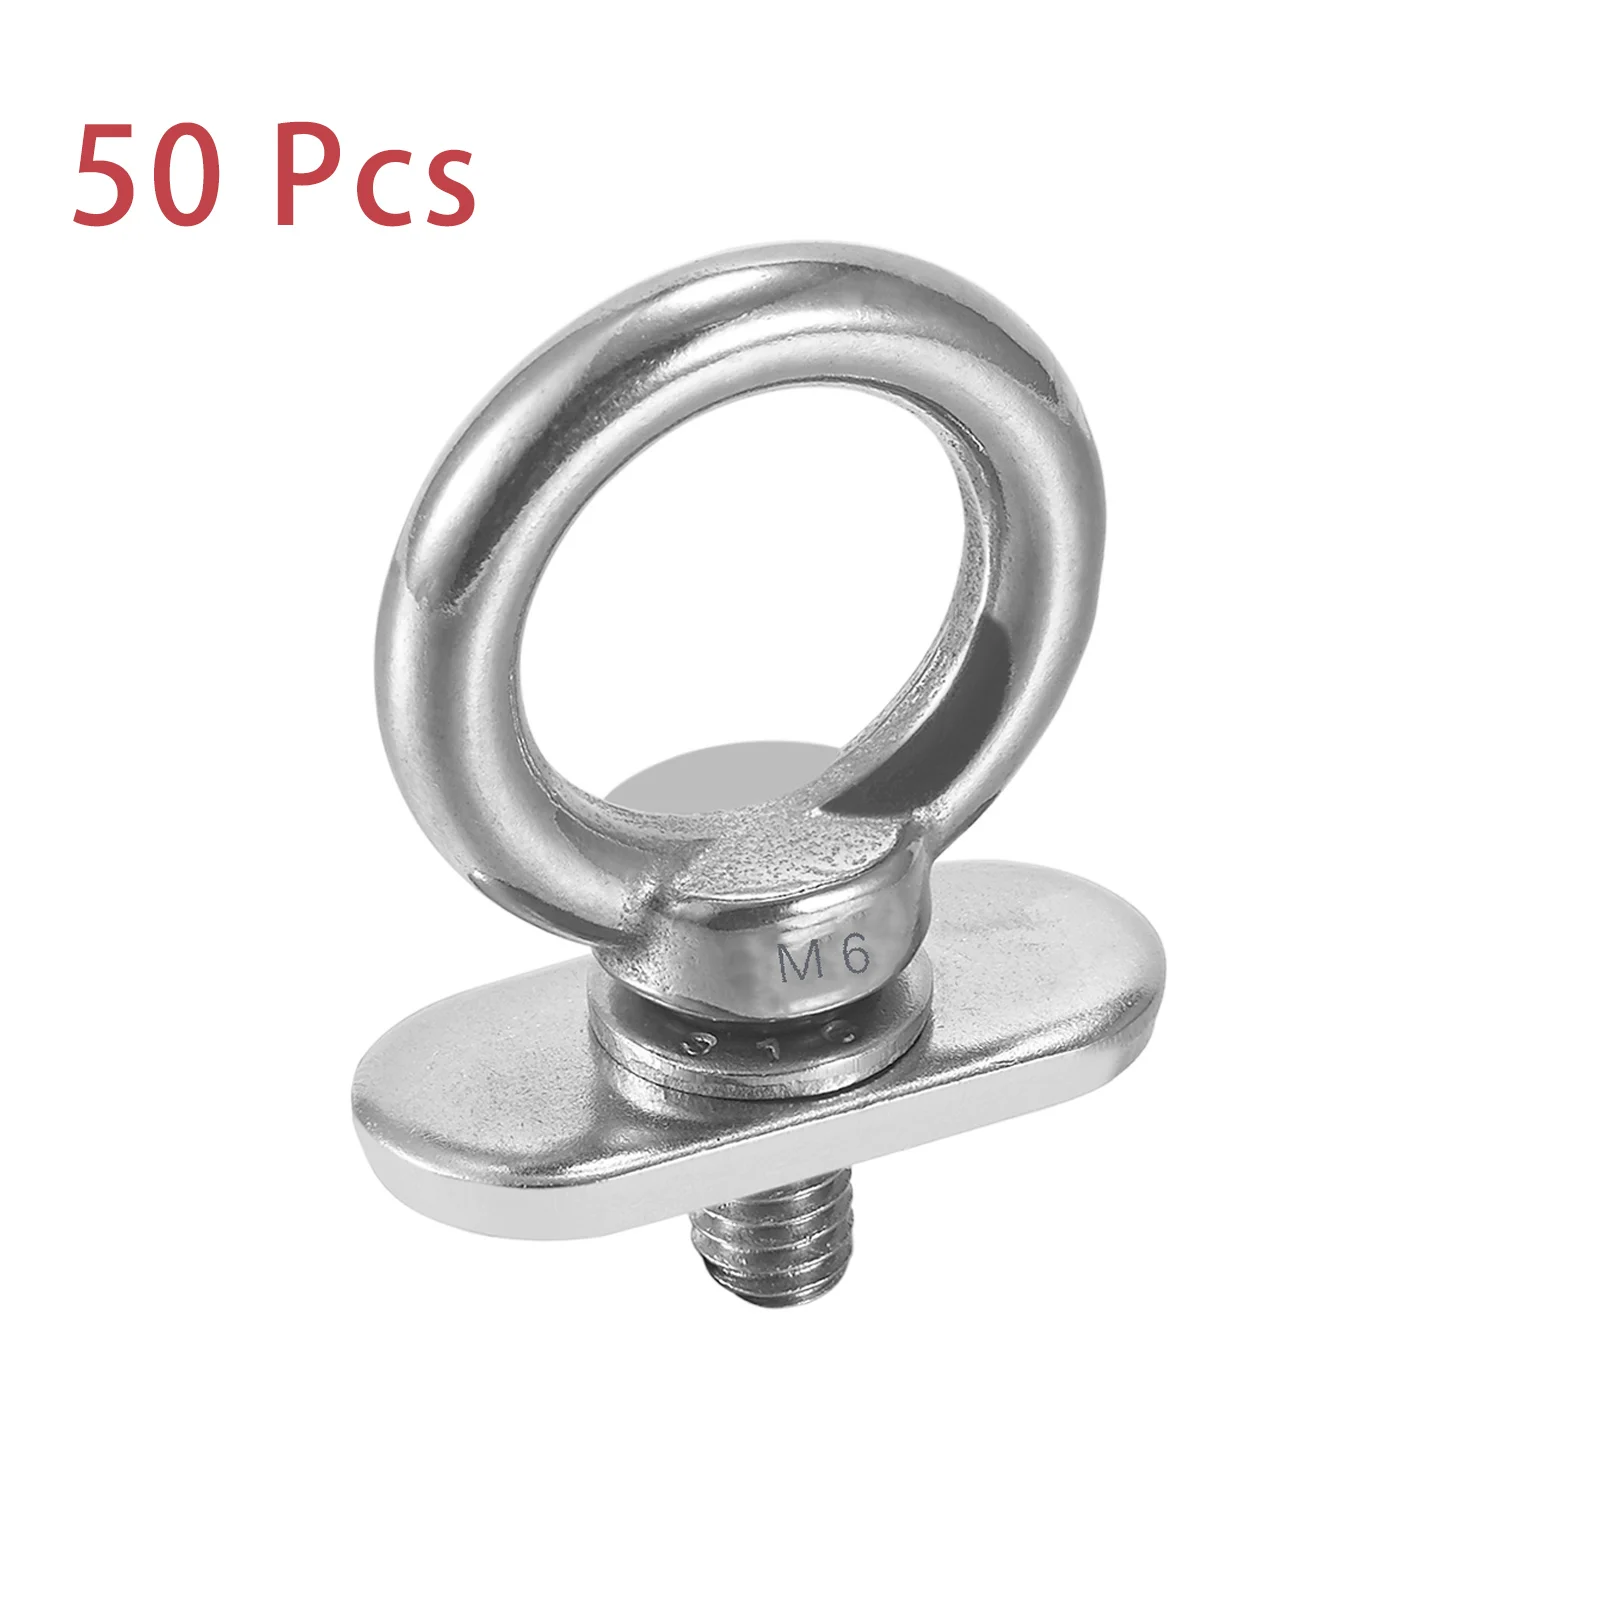 Track Mount Tie Down Eyelets, M6 Bolt, 316 Stainless Steel, Kayak Track Accessories (50 Packs)